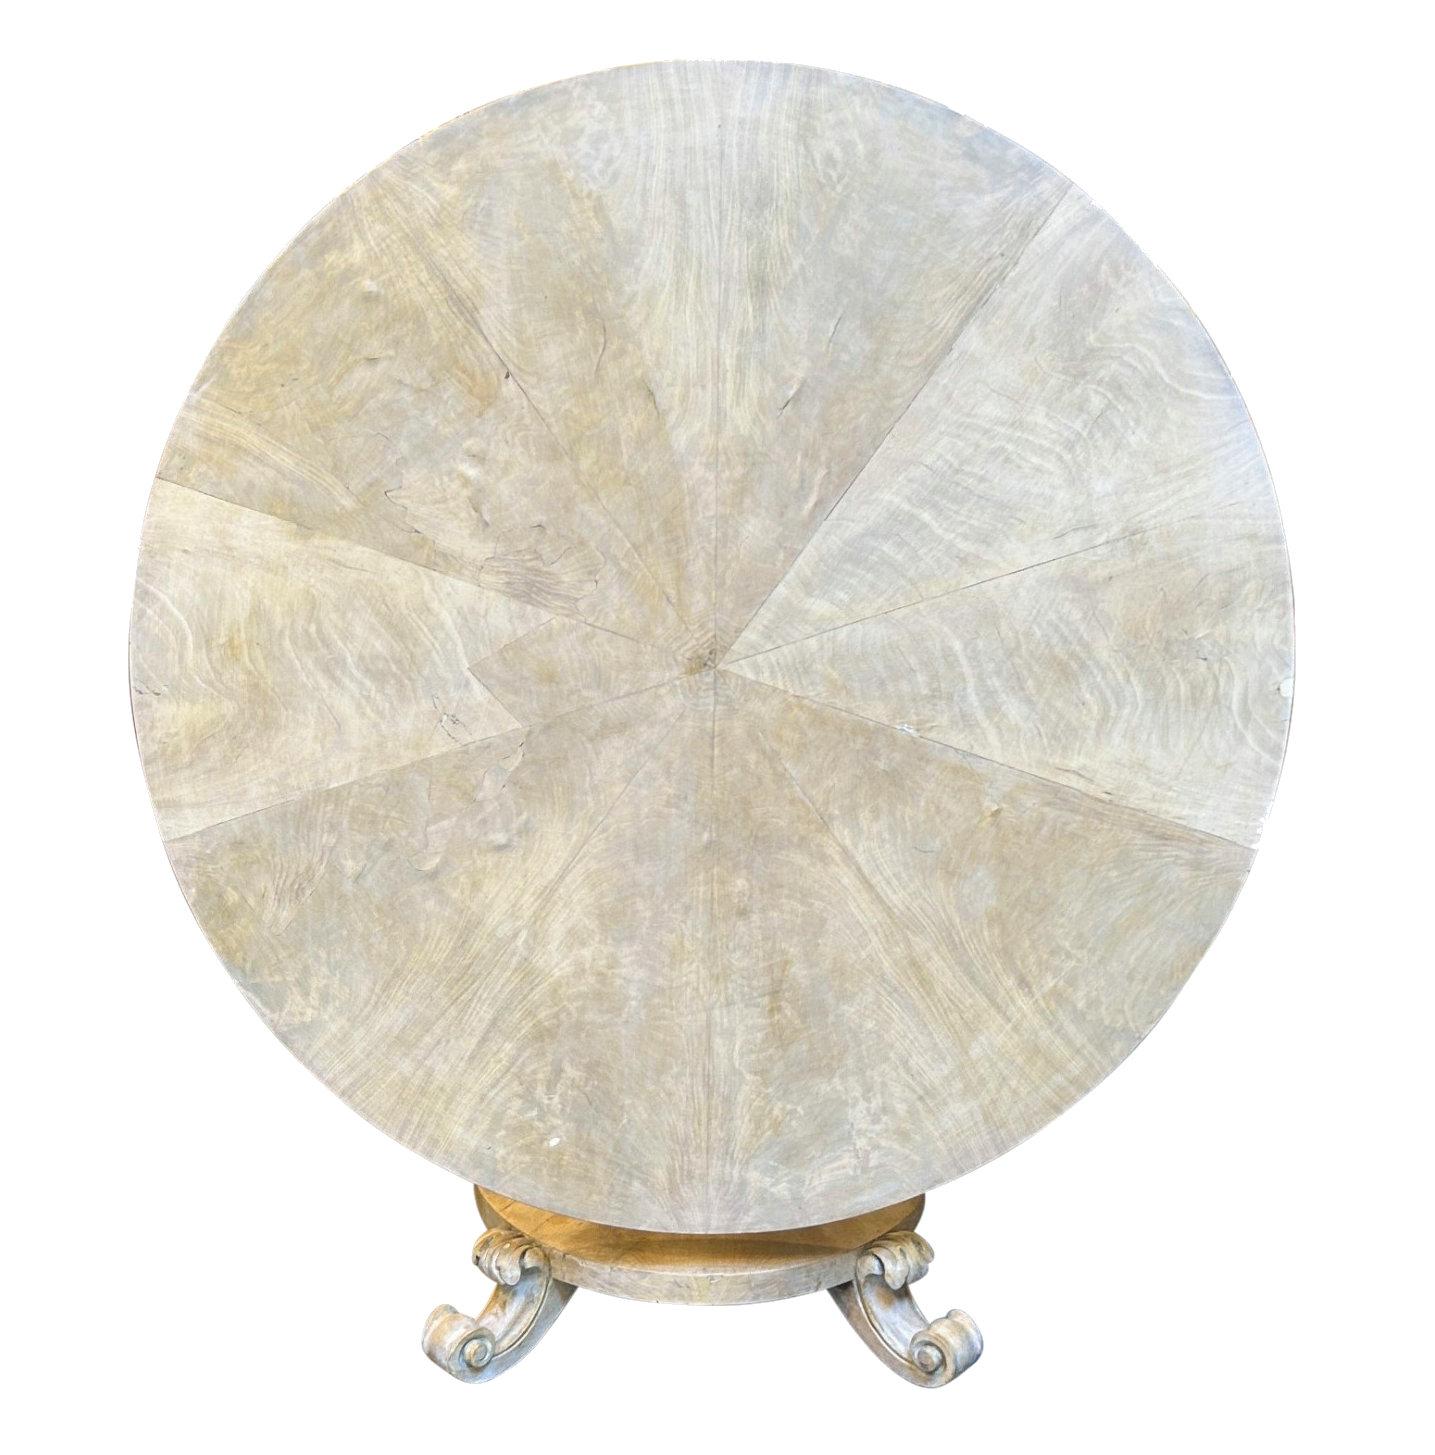 An English circular, tilt-top centre table in pickled mahogany. With a pedestal base on four acanthus feet and a sectional veneered top. The finish is one of aged parchment.